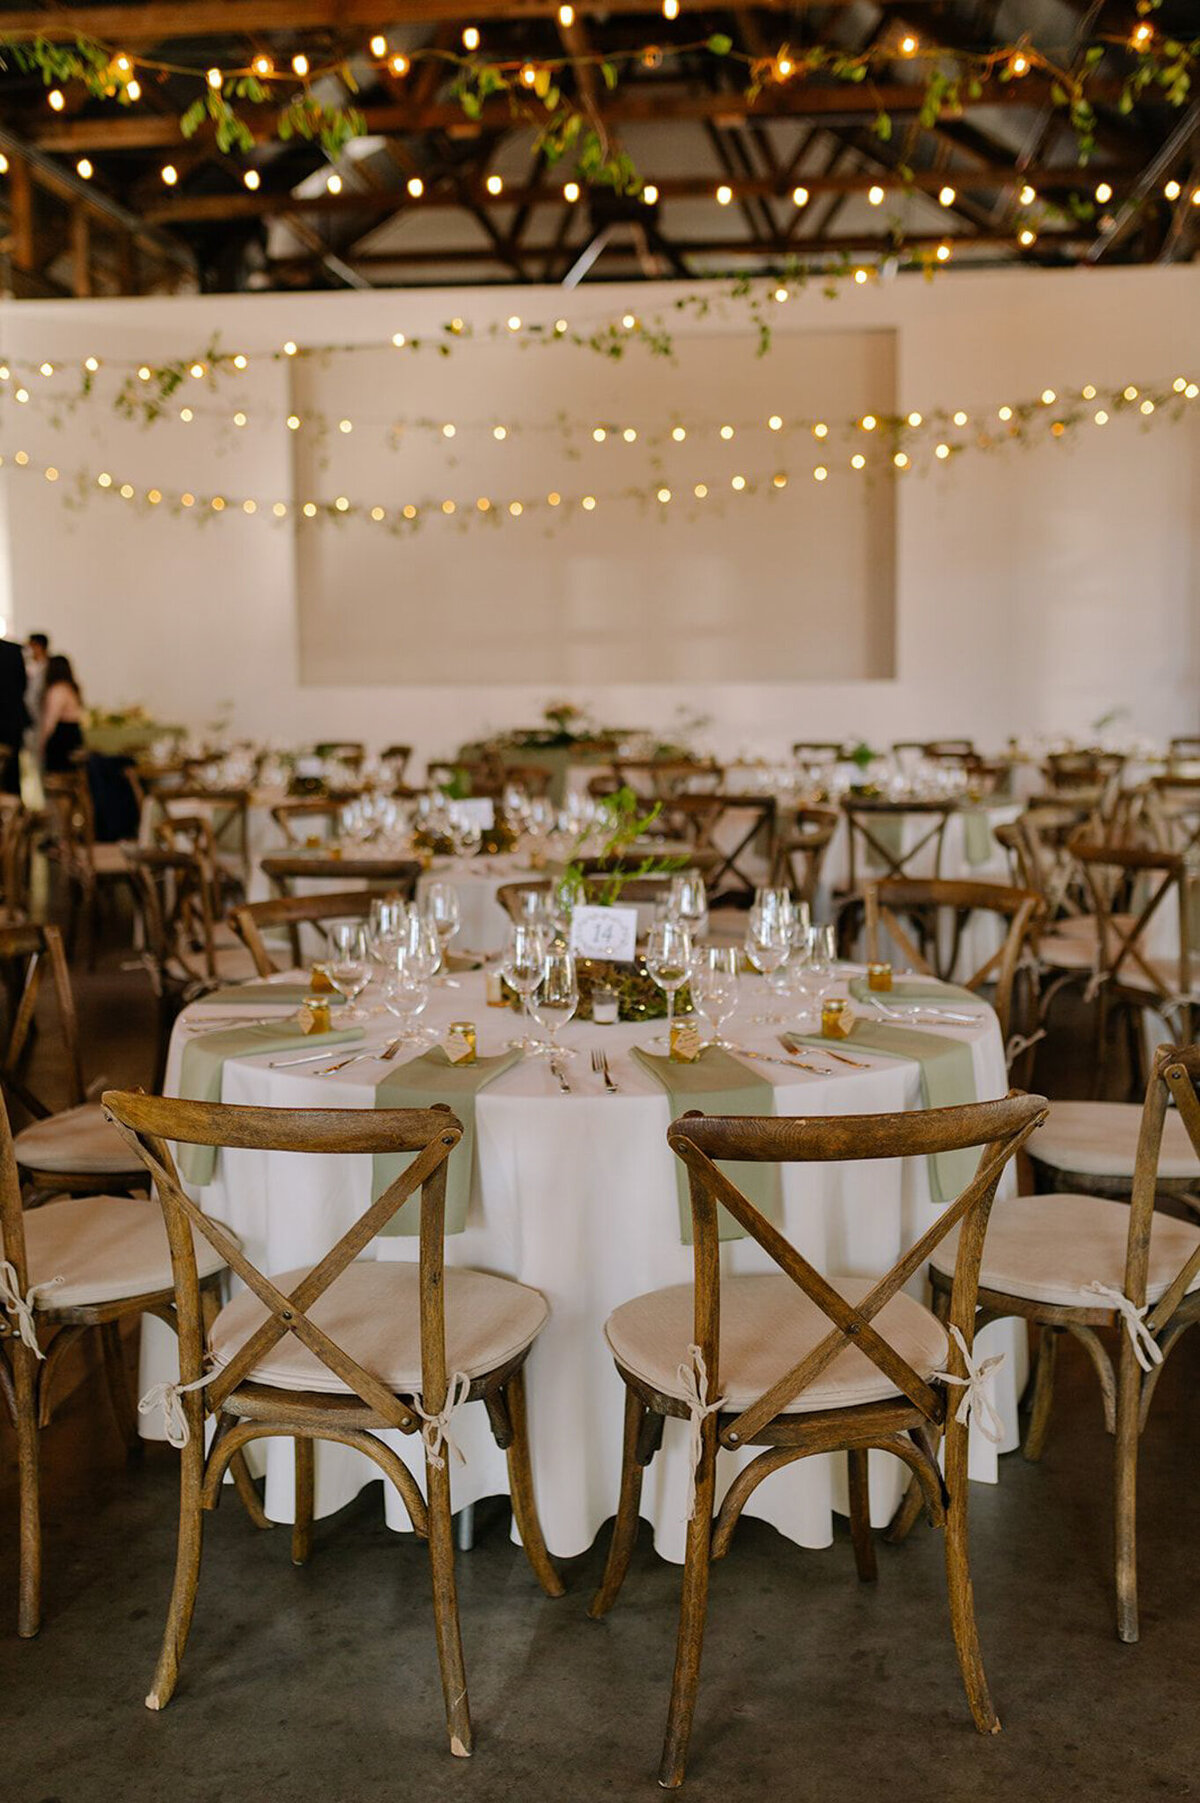 Classic and elegant wedding reception at The Pipe Shop Venue, a historic and industrial venue at The Shipyards in North Vancouver, featured on the Brontë Bride Vendor Guide.